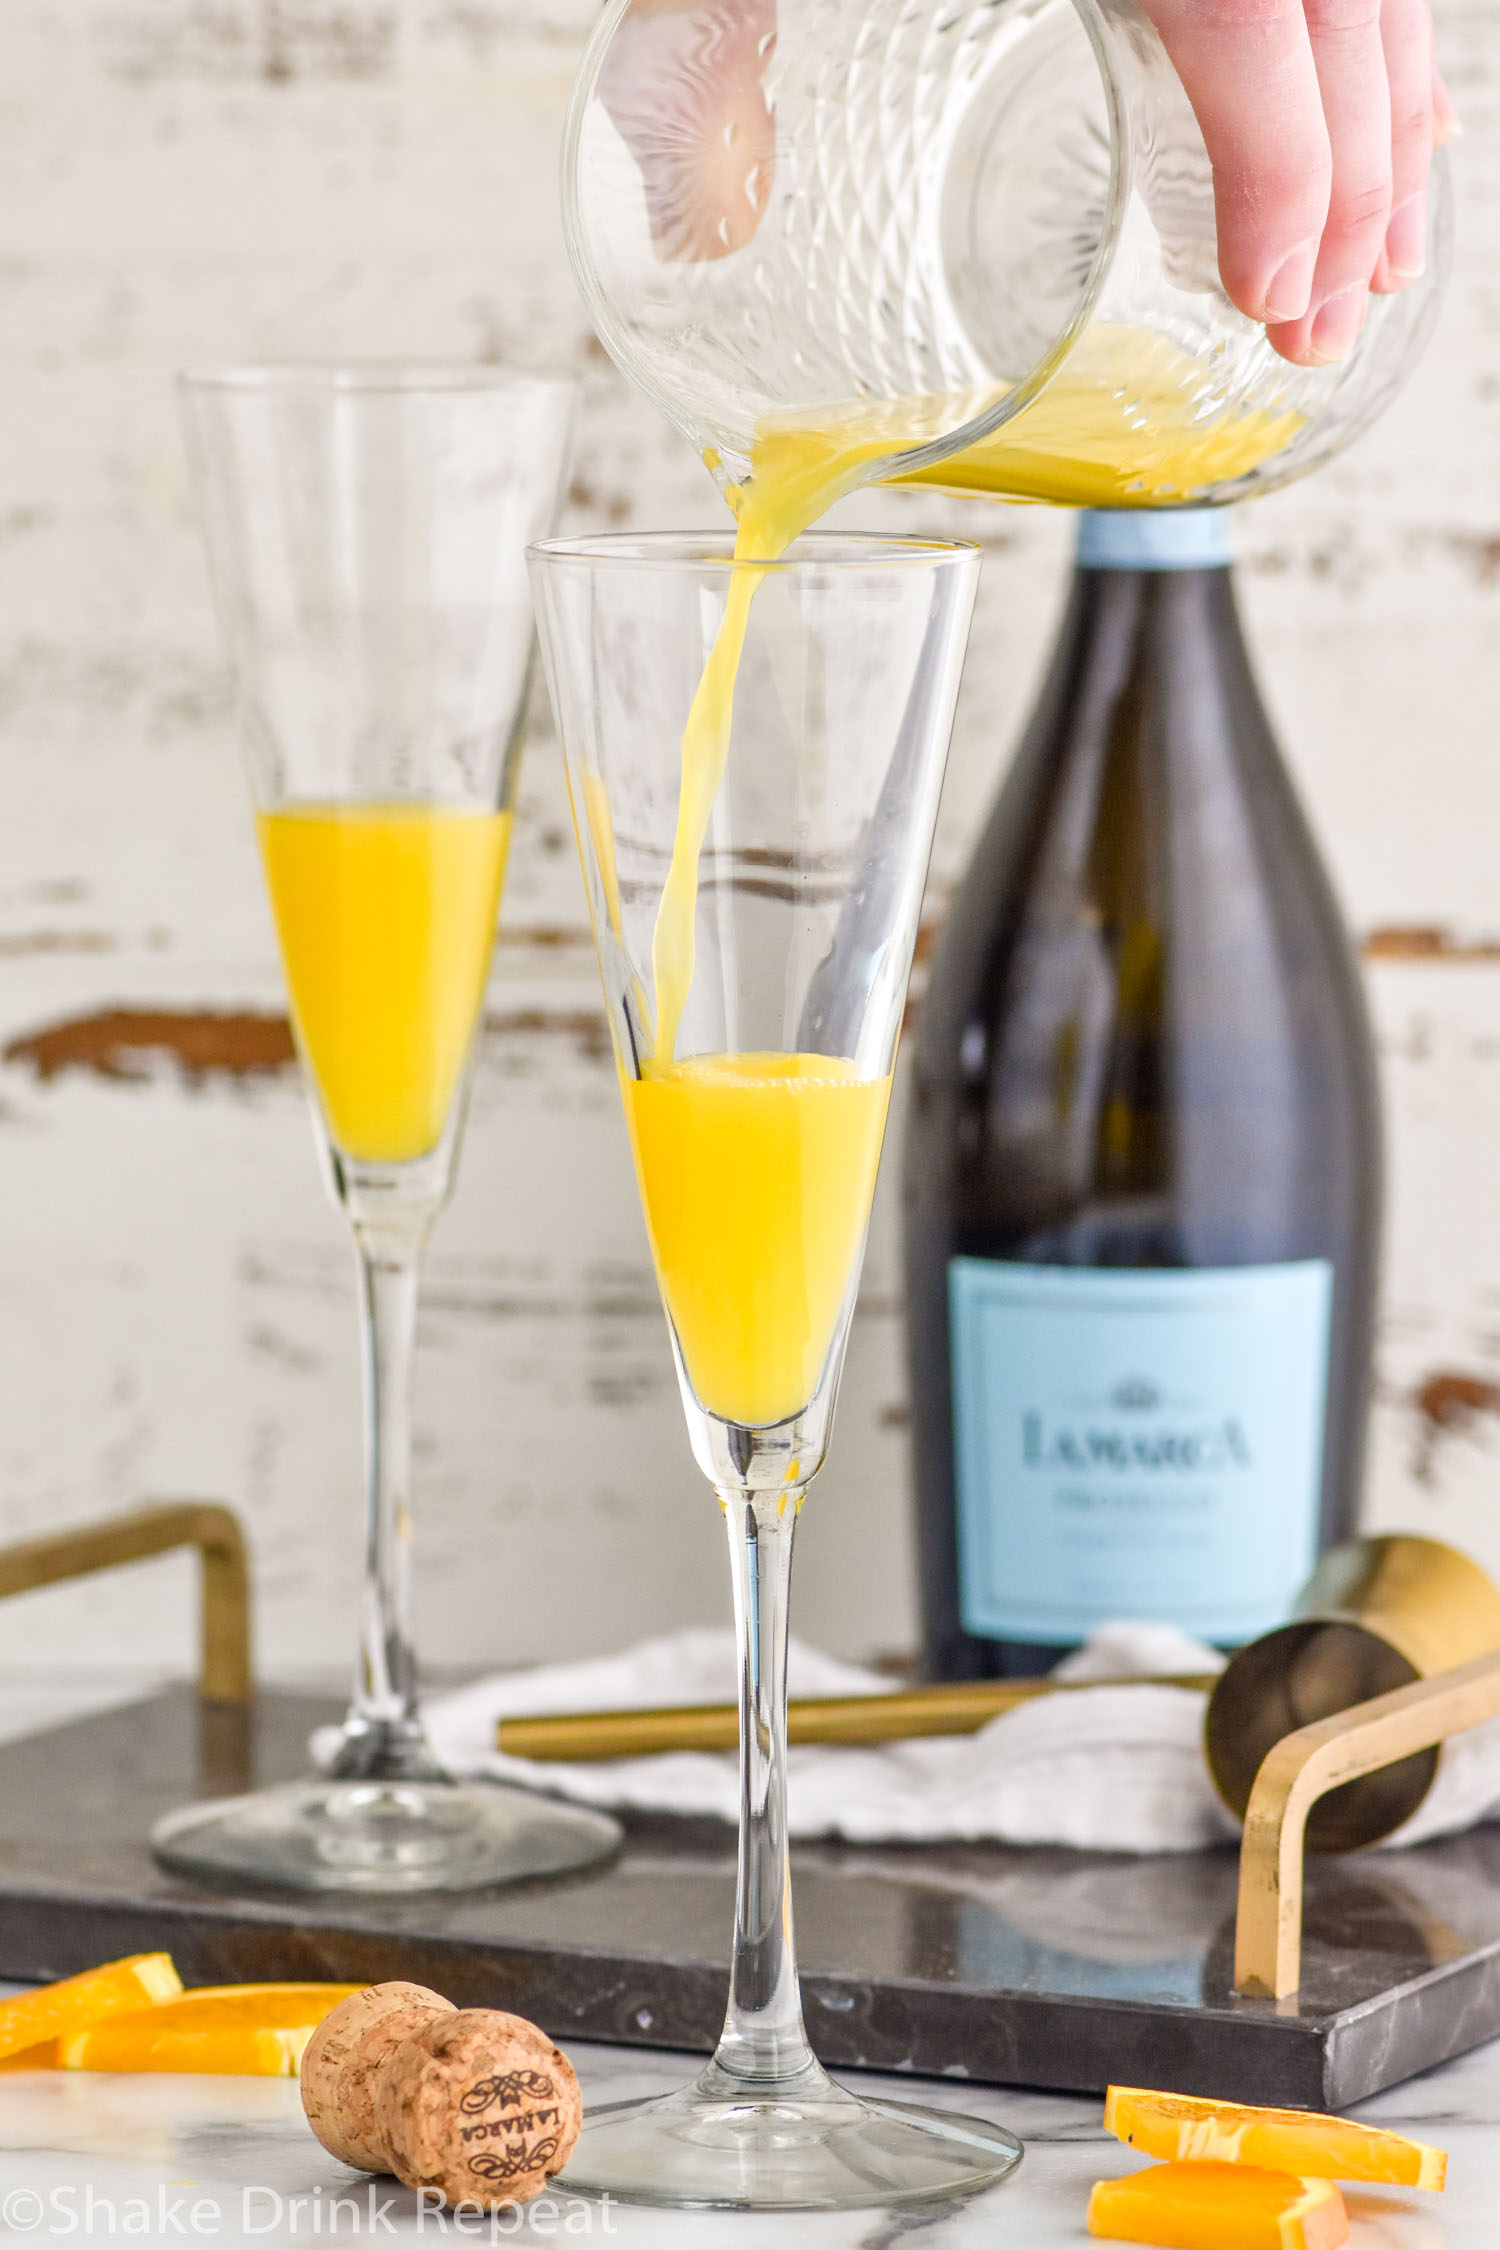 Photo of person's hand pouring orange juice into flute glasses for Mimosa recipe. Bottle of Champagne in the background for Mimosa recipe.